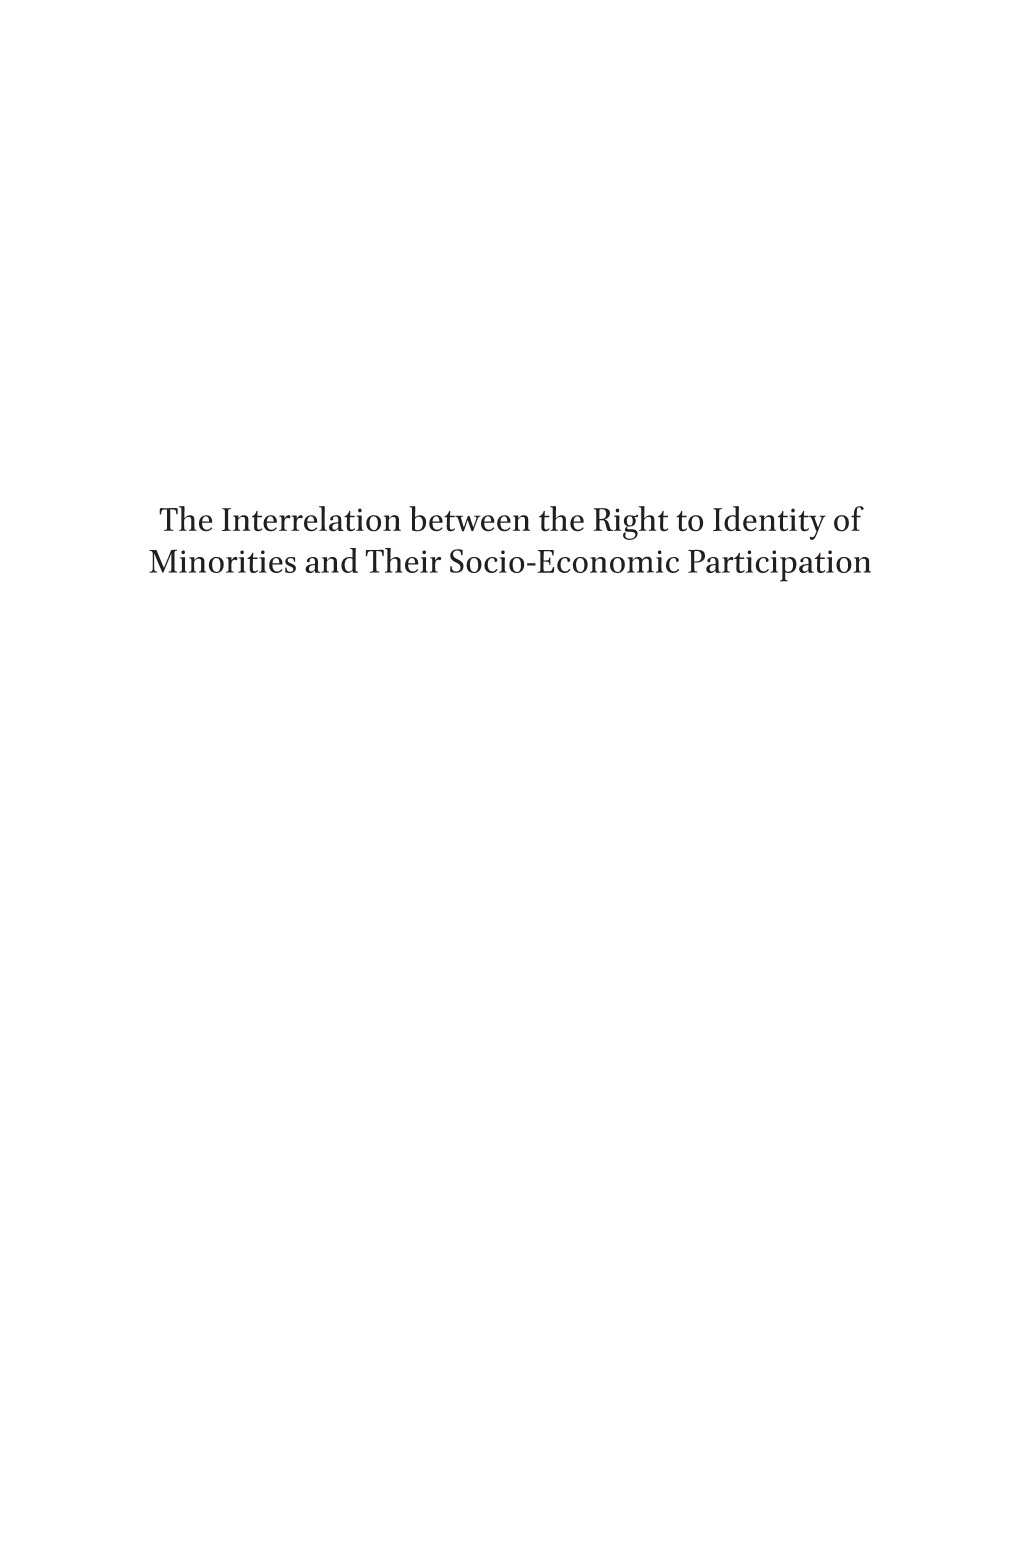 The Interrelation Between the Right to Identity of Minorities and Their Socio-Economic Participation Studies in International Minority and Group Rights